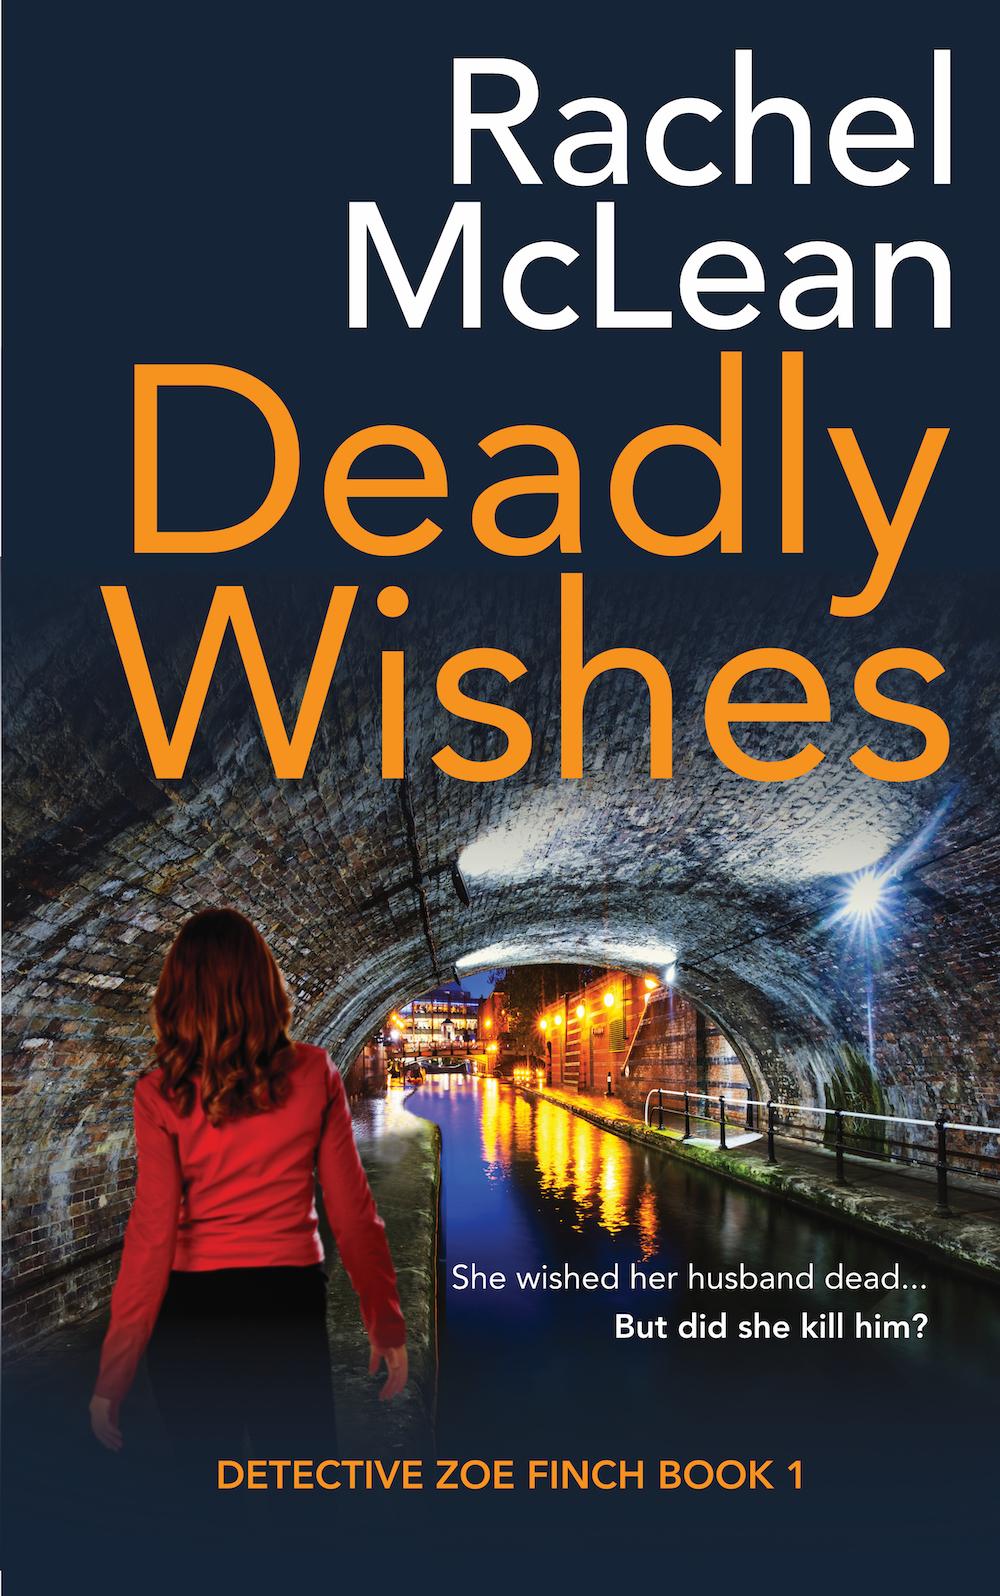 Deadly Wishes